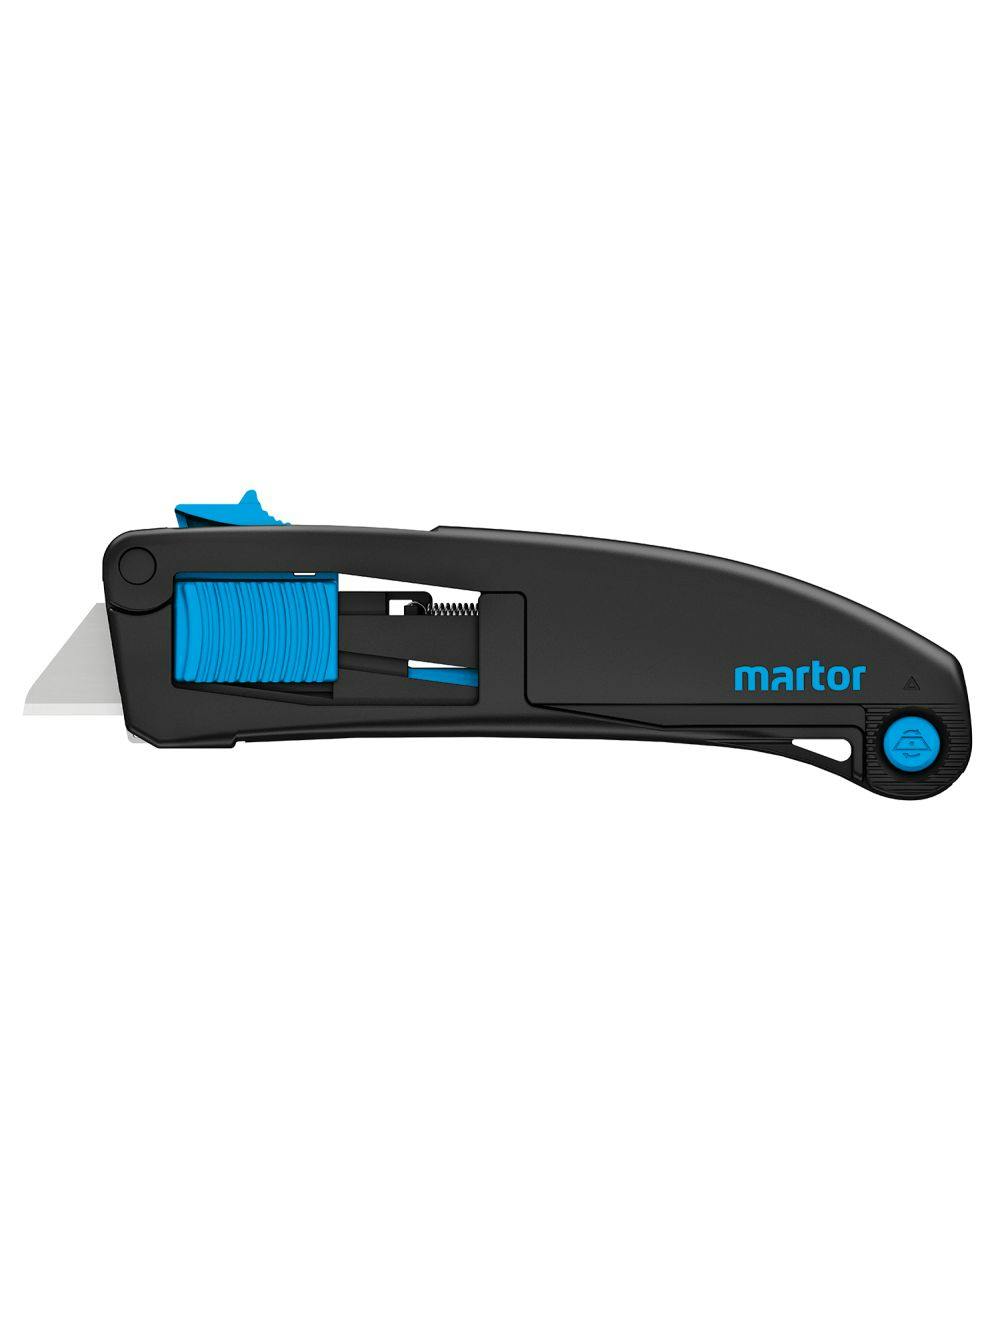 Martor Secupro Maxisafe With Blade No. 60099, Rounded Blade Tips (Single Unit)